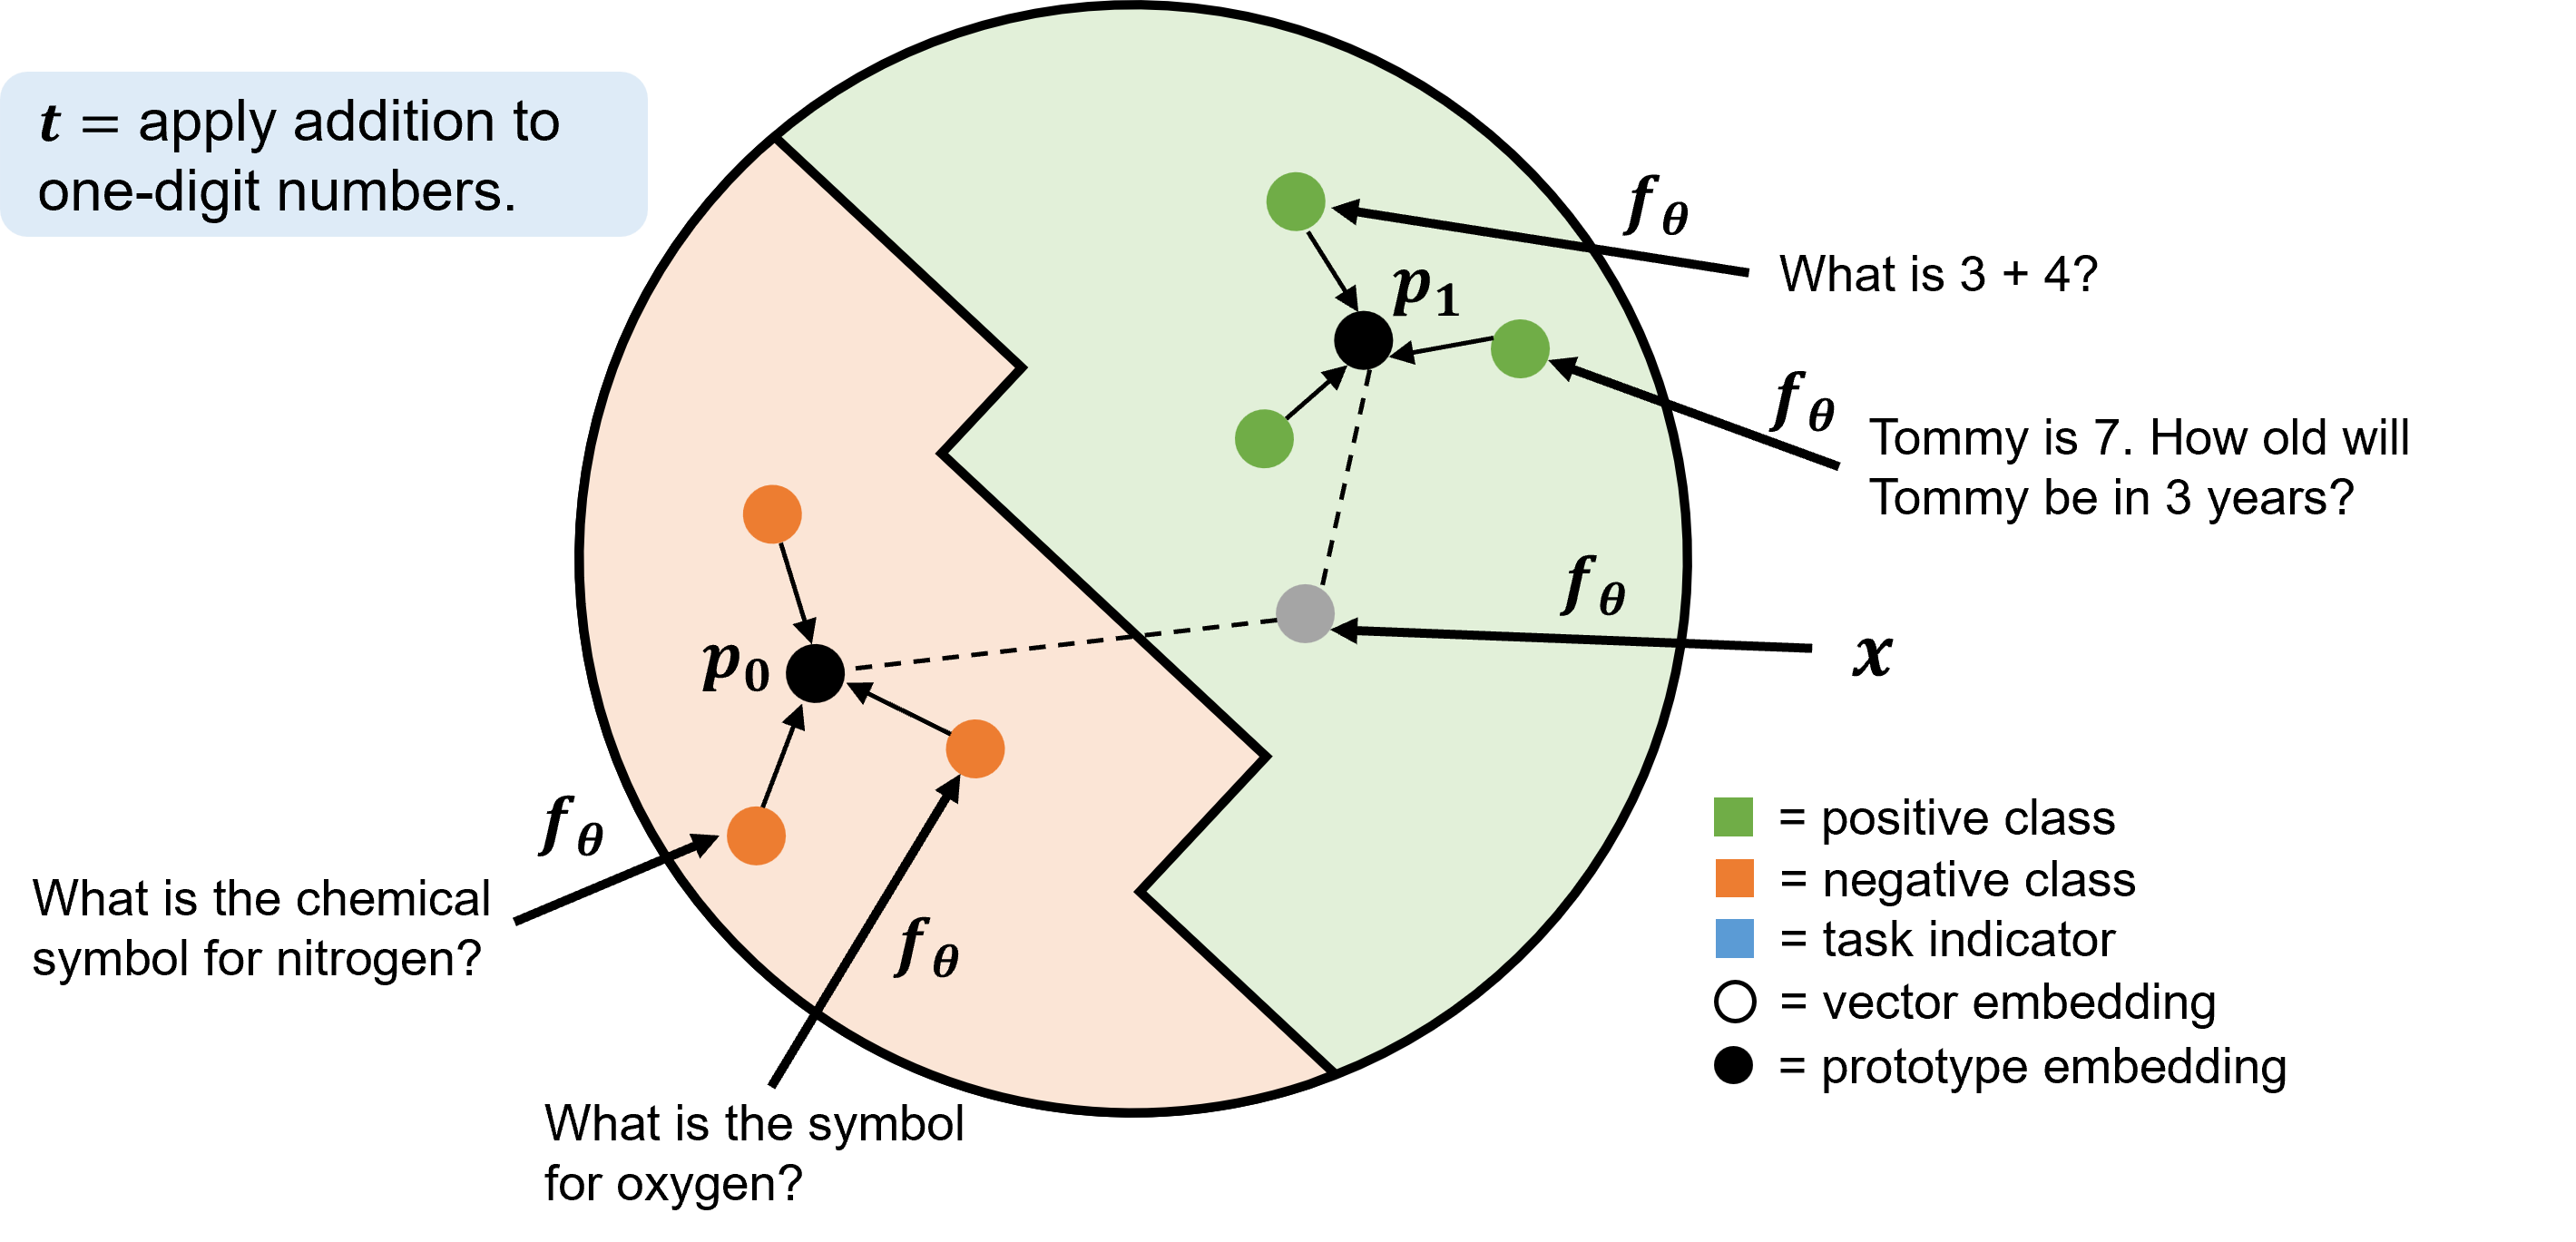 Three questions mapped using an arrow labeled by f to a green circle, and three questions mapped using an arrow labeled by f to an orange circle. Two black circles are in the middle of the cluster of green circles and orange circles respectively, and are labeled p1 and p0. A new question, labeled x, is mapped to a gray circle that is closer to p1